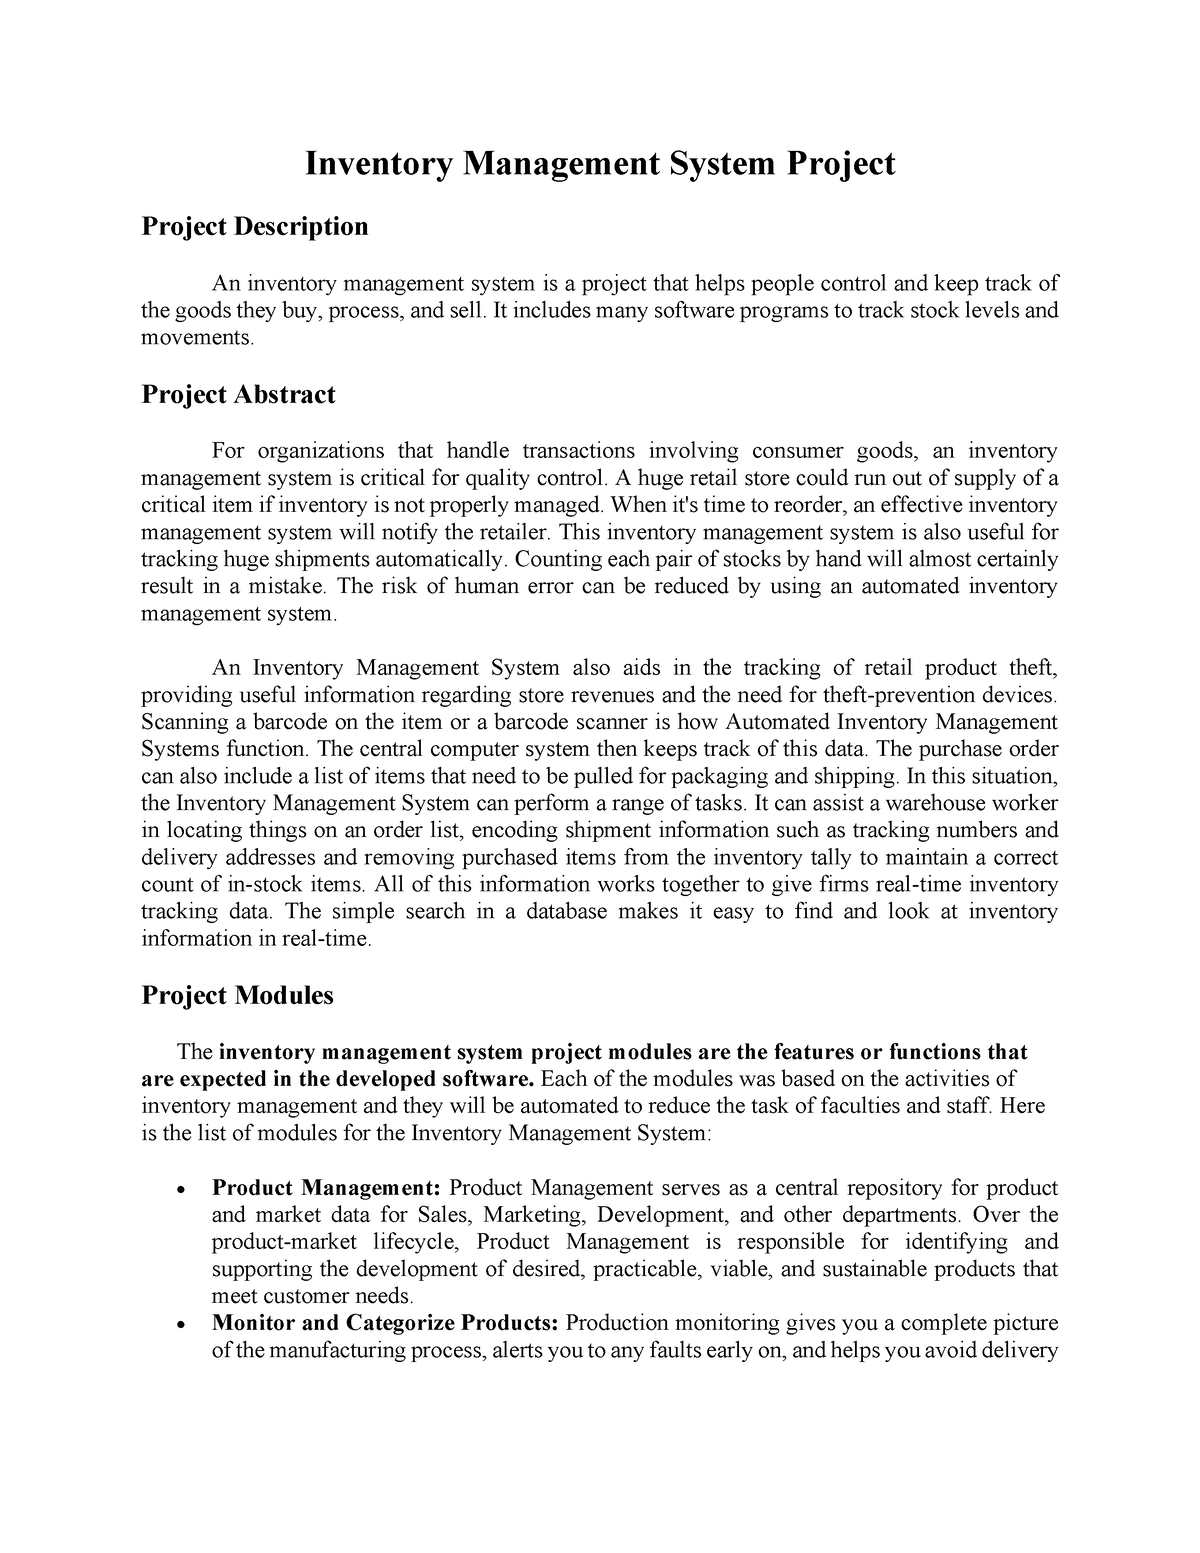 inventory management literature review project pdf